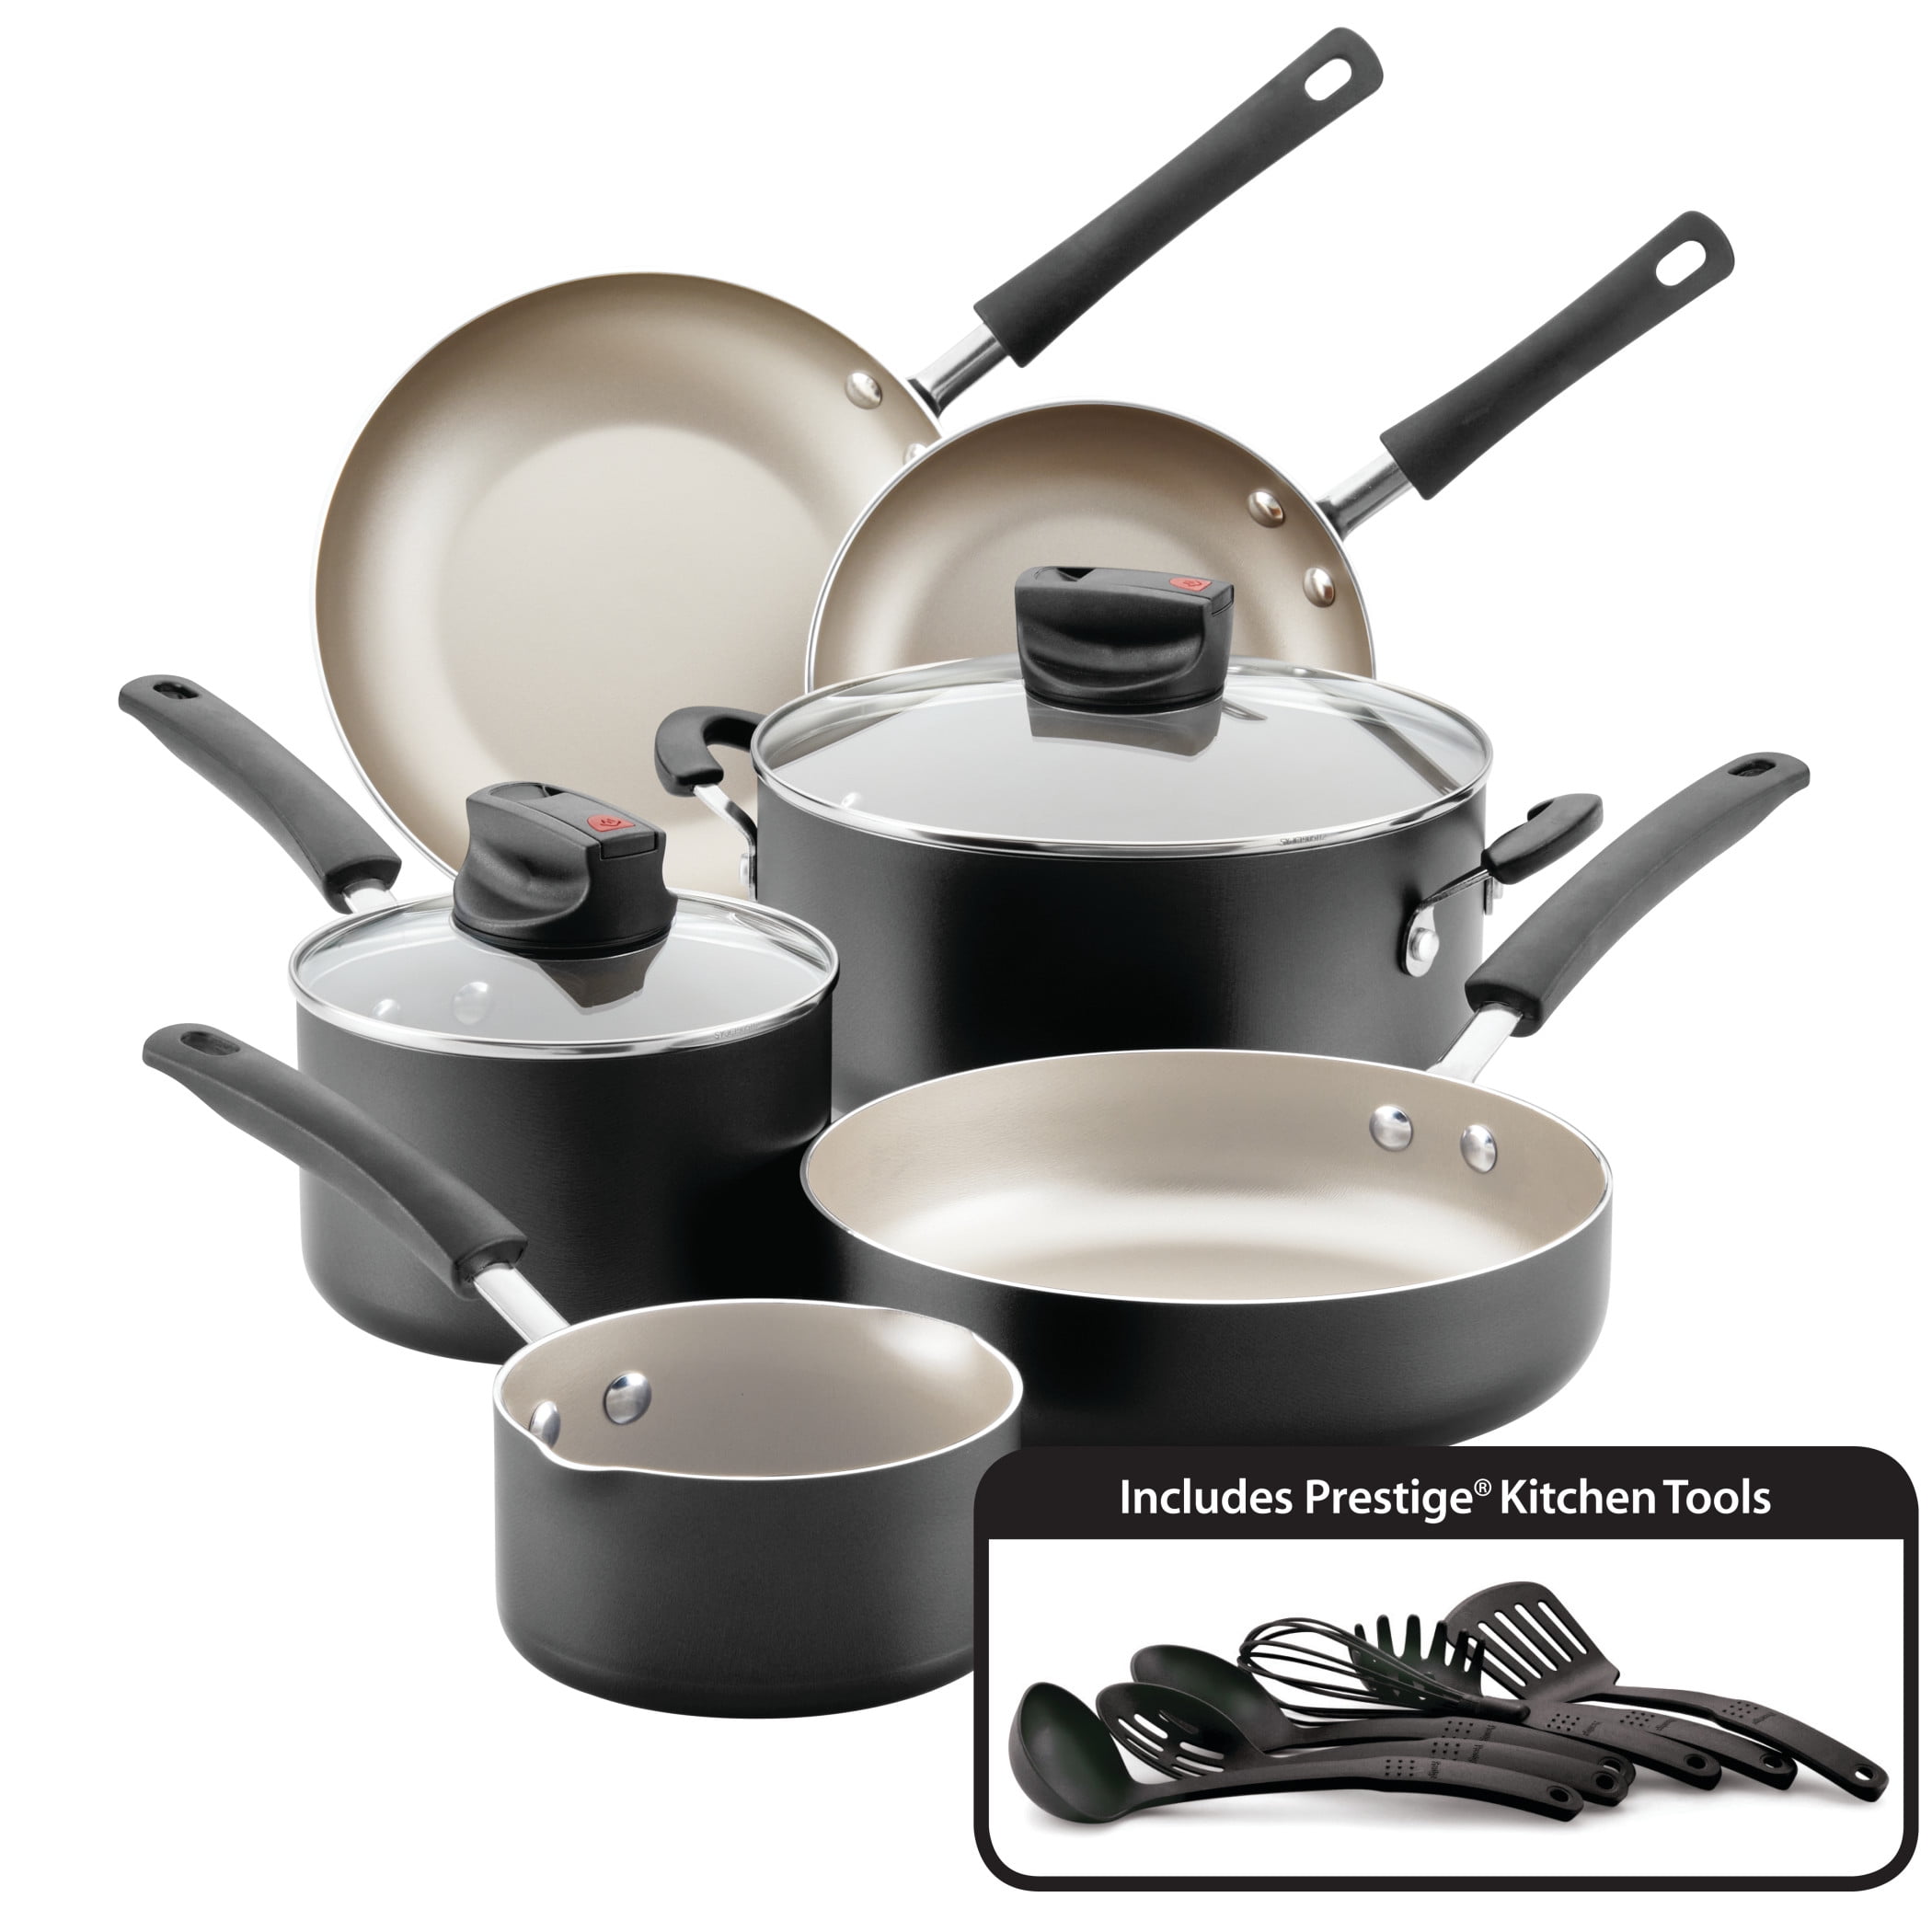 Farberware 12-Piece Easy Clean Nonstick Pots and Pans/Cookware Set, Black 